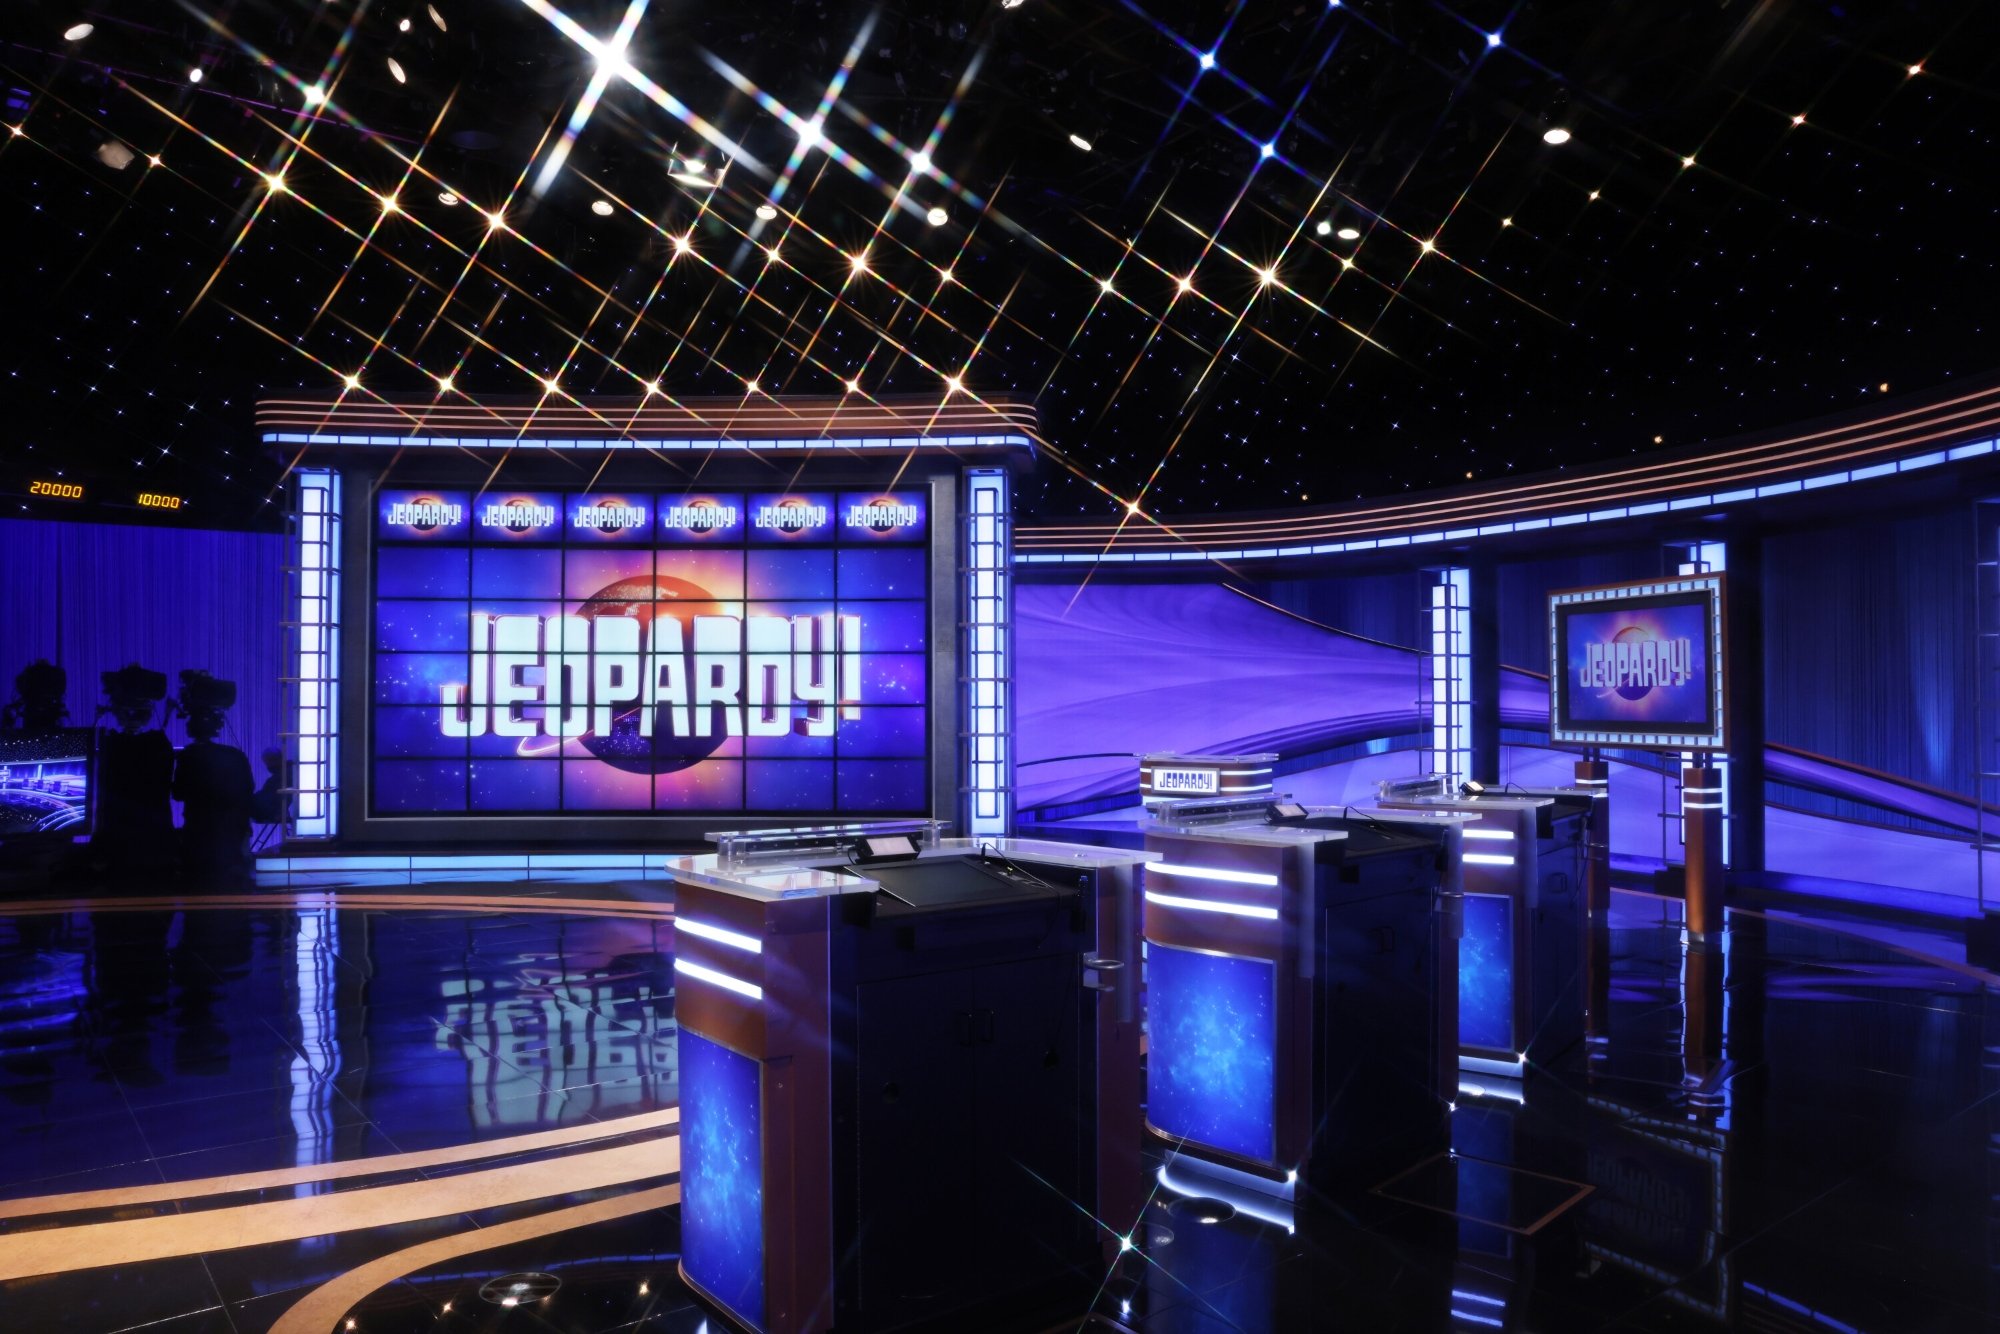 'Jeopardy!' stage that might implement cash bonus. The 'Jeopardy!' game board lit up and the three podiums for the contestants.